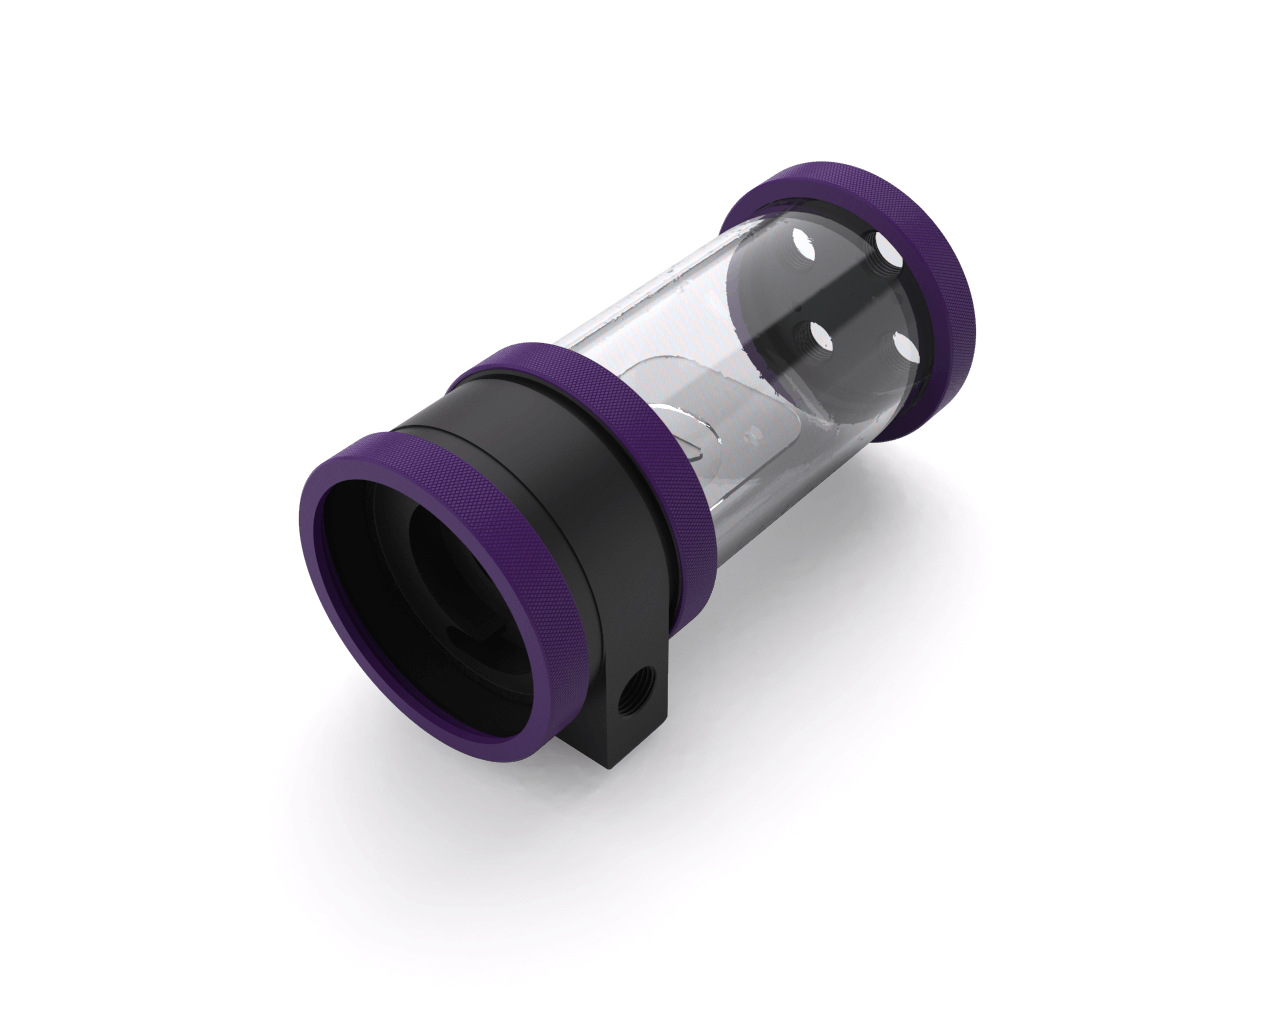 PrimoChill CTR SFF Phase II High Flow D5 Enabled Reservoir System - Black POM - 120mm - PrimoChill - KEEPING IT COOL TX Matte Purple